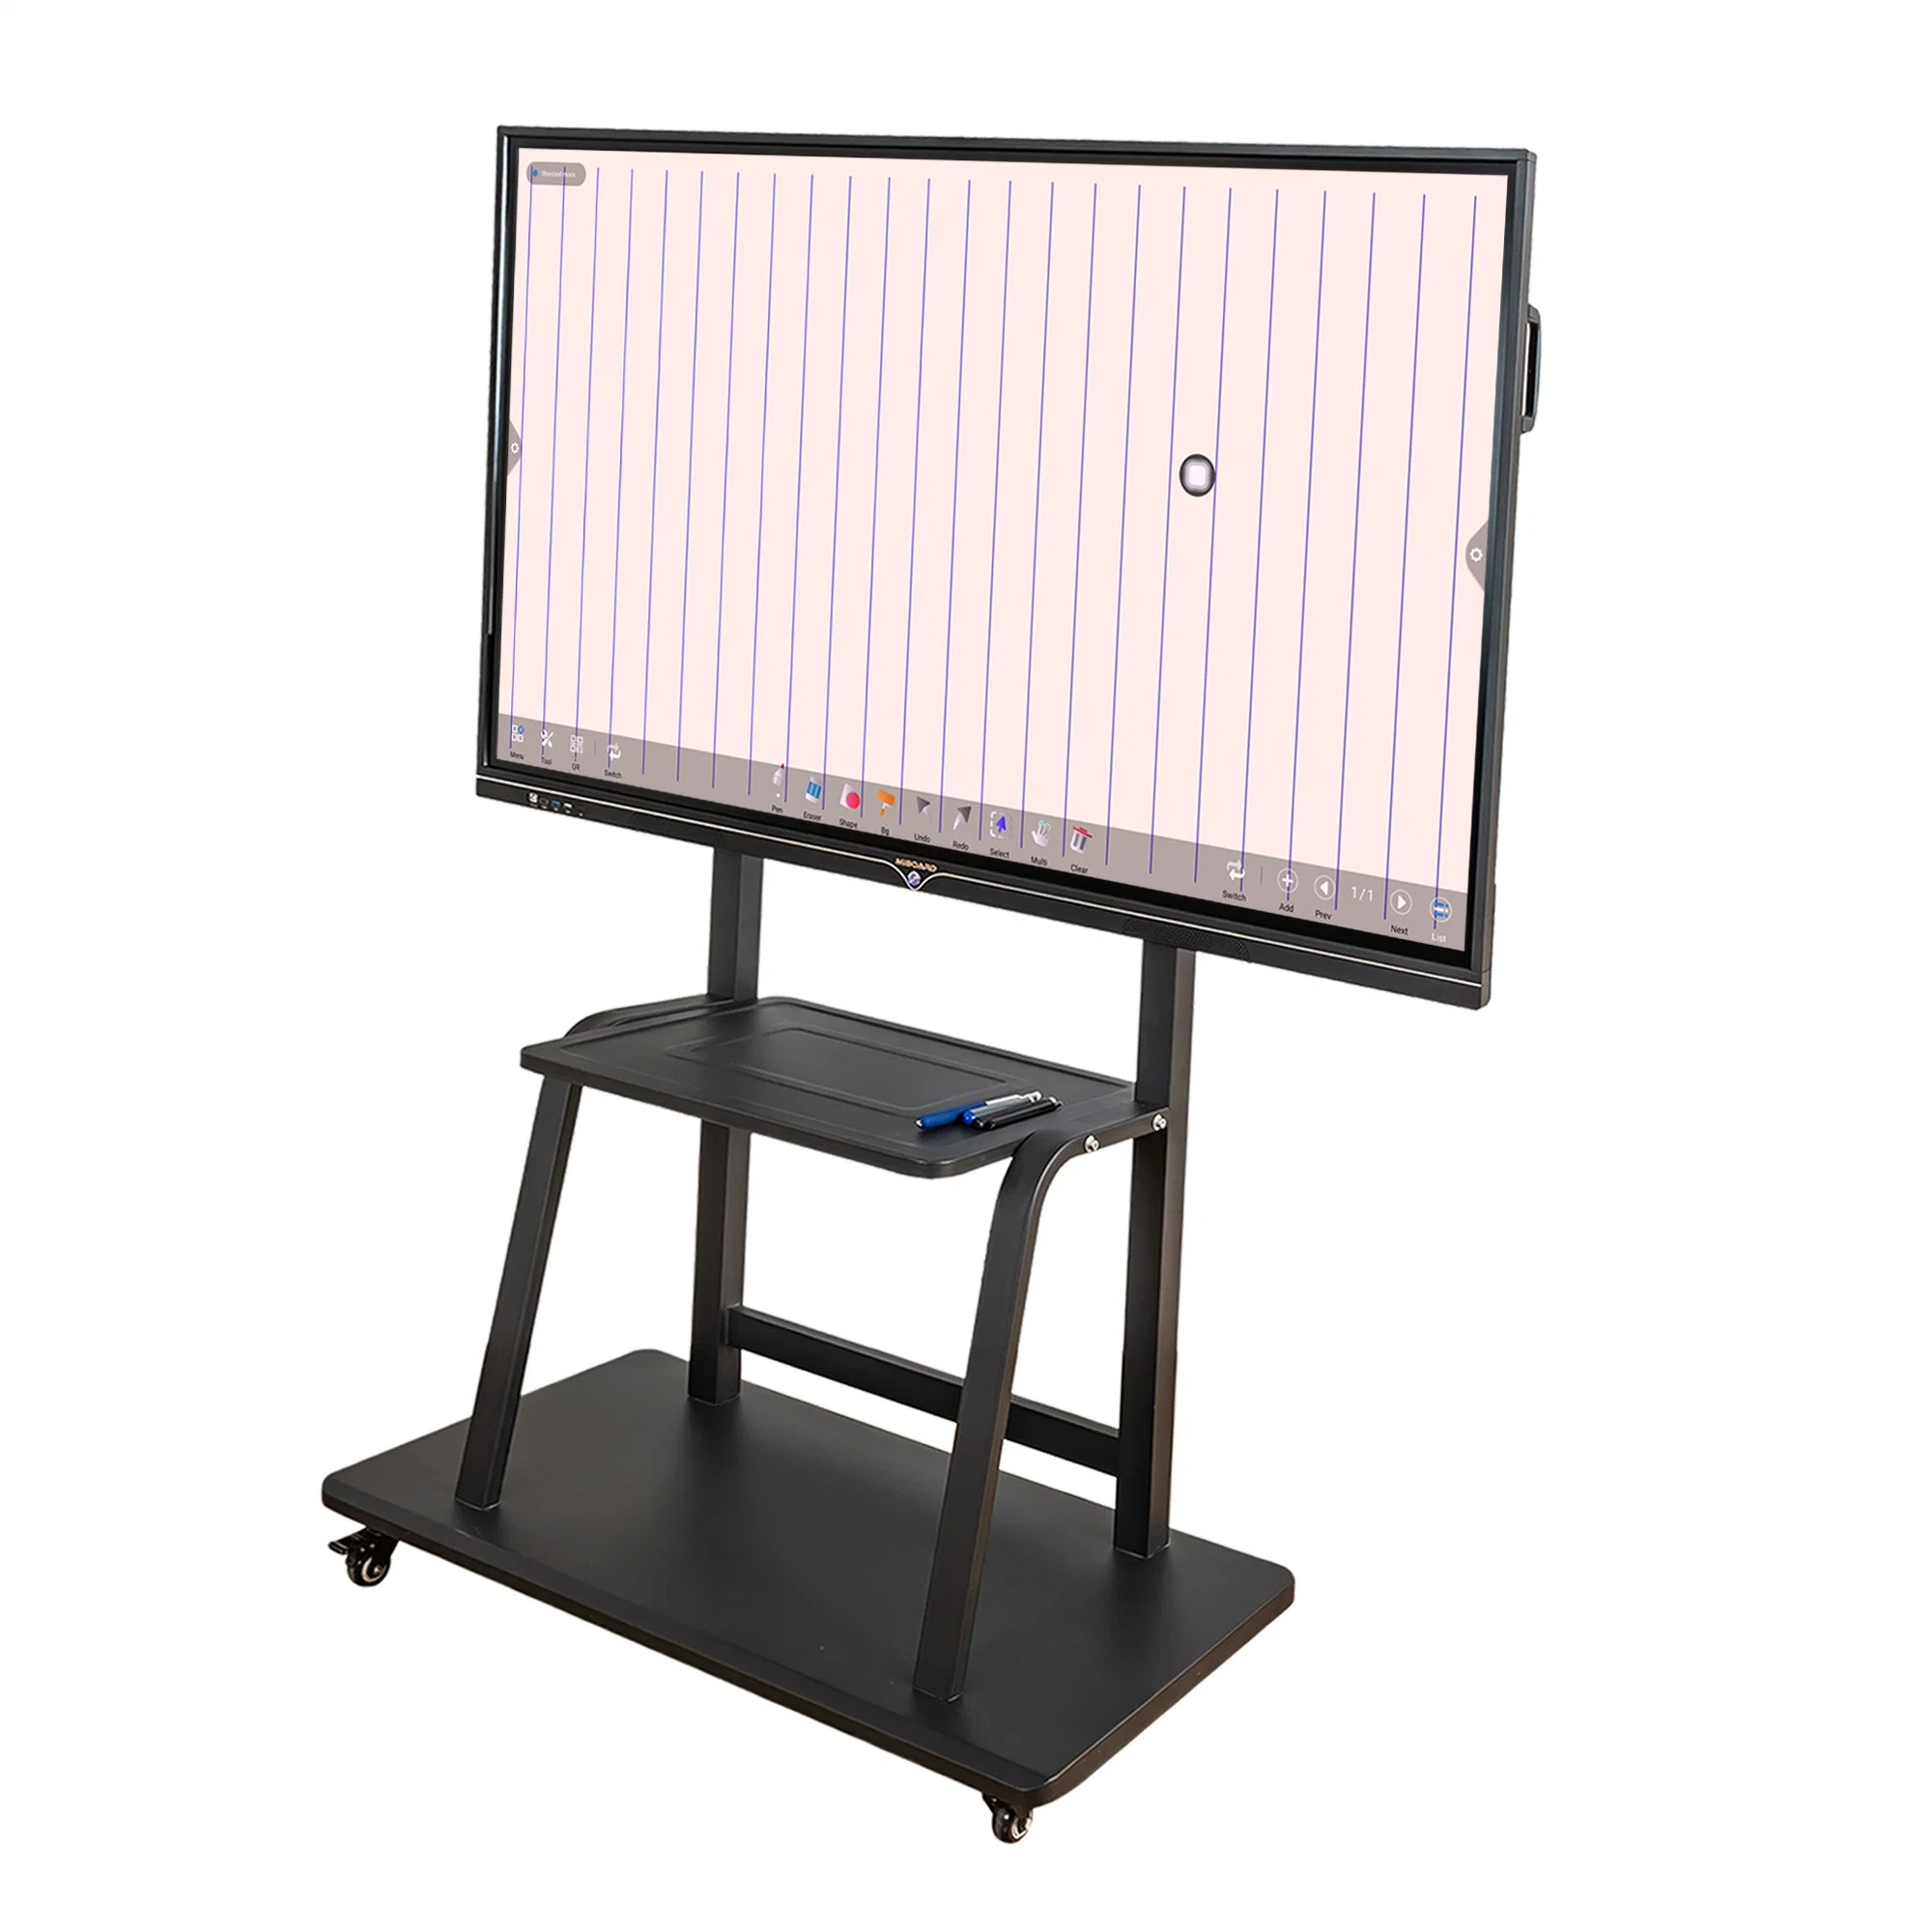 Promo OEM Monitor 3840*2160 4K Finger Touch Interactive Whiteboard Meeting Interactive Flat Panel Teaching Smart Board 65, 75, 85, 86, 98 Inch 10 Points Touch